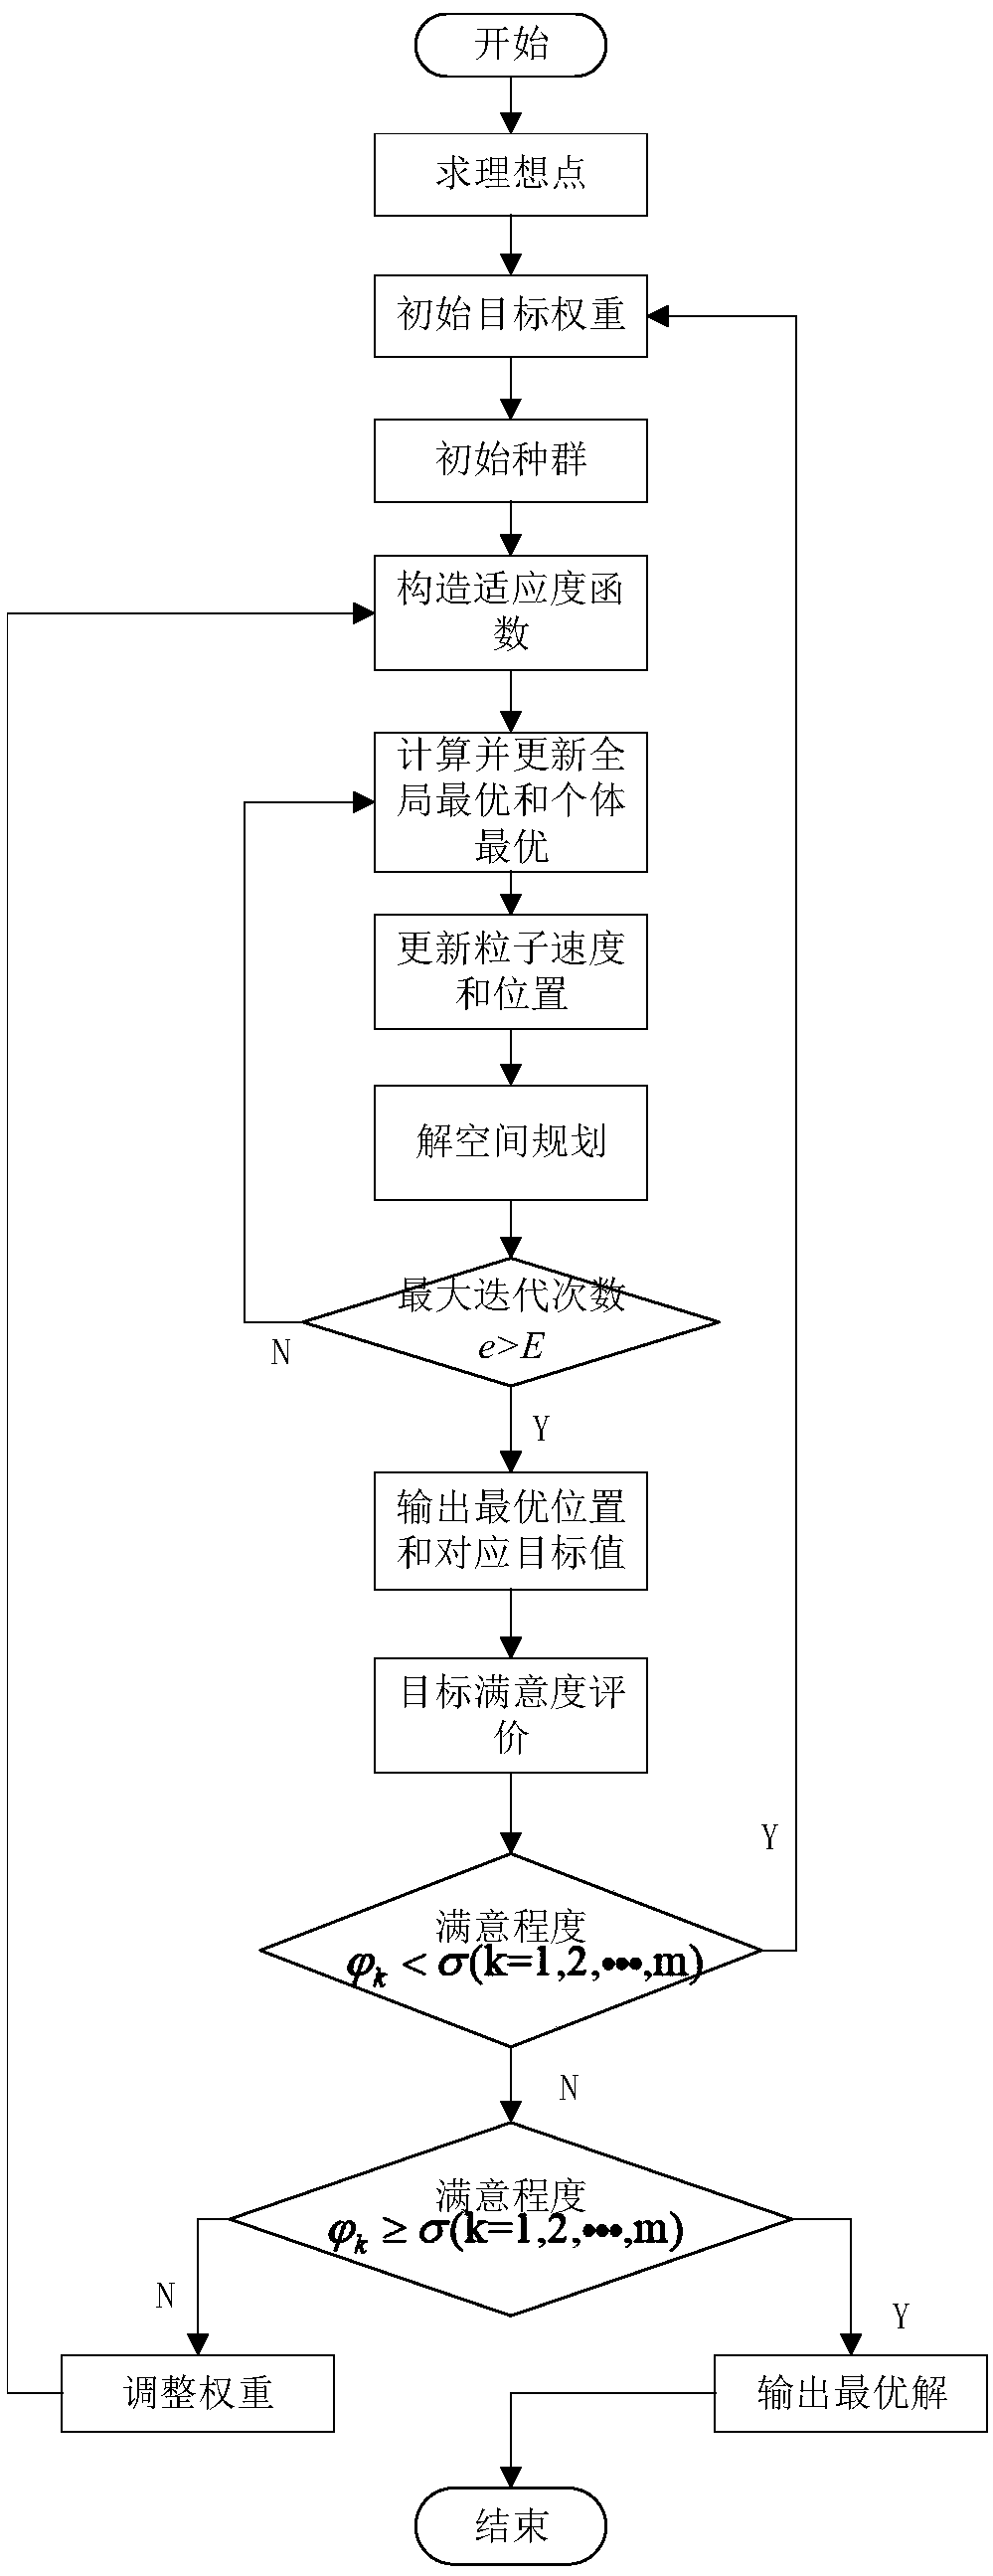 Equipment supporting task multi-objective planning method facing task resource matching